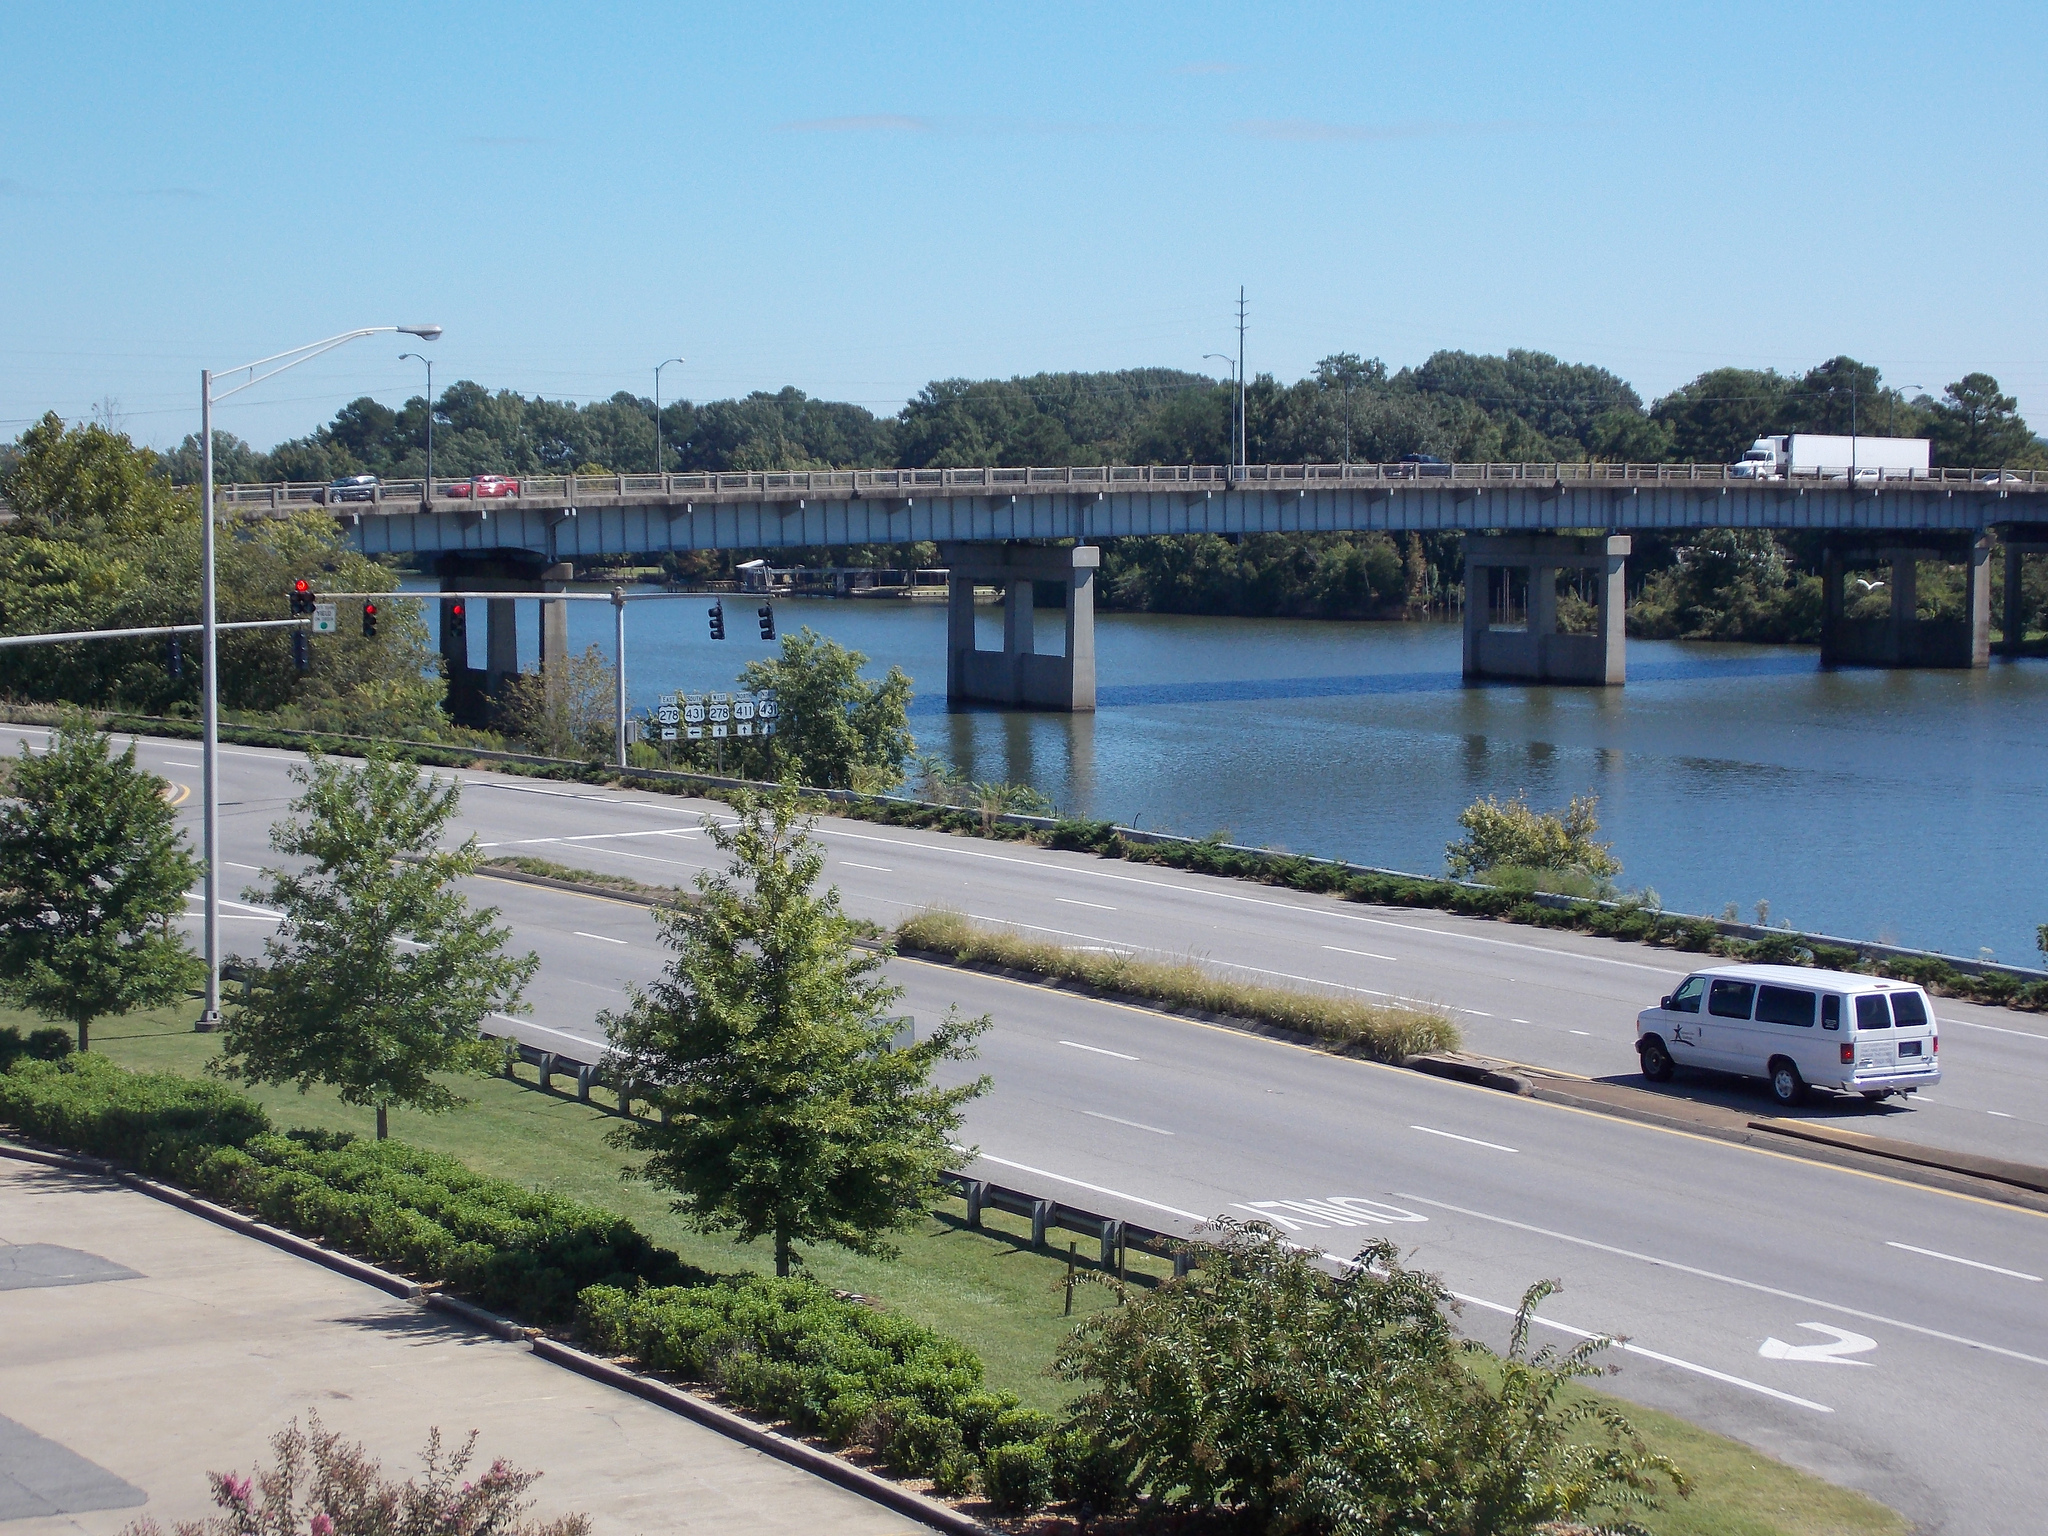 Vehicle plunges off Meighan Bridge into Coosa River in Gadsden; recovery operation in progress